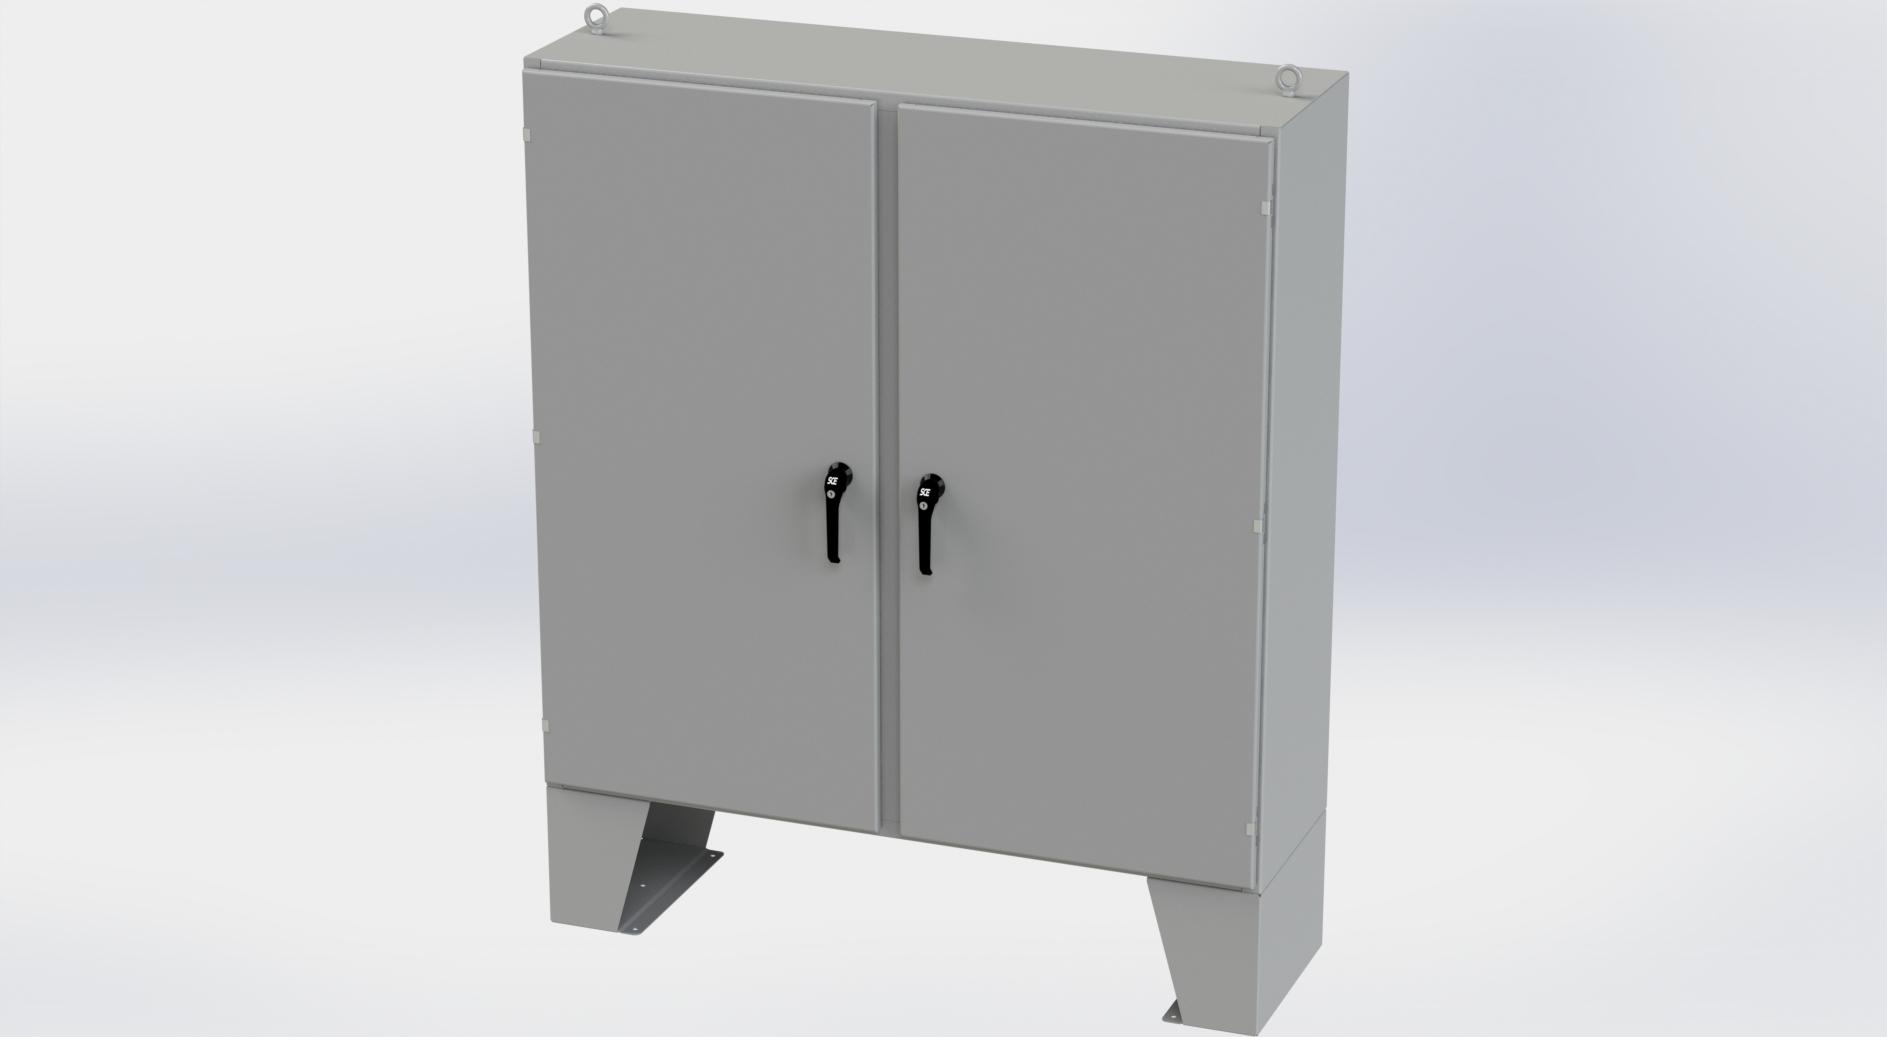 Saginaw Control SCE-60EL6018LPPL 2DR EL LPPL Enclosure, Height:60.00", Width:60.00", Depth:18.00", ANSI-61 gray powder coating inside and out. Optional sub-panels are powder coated white.